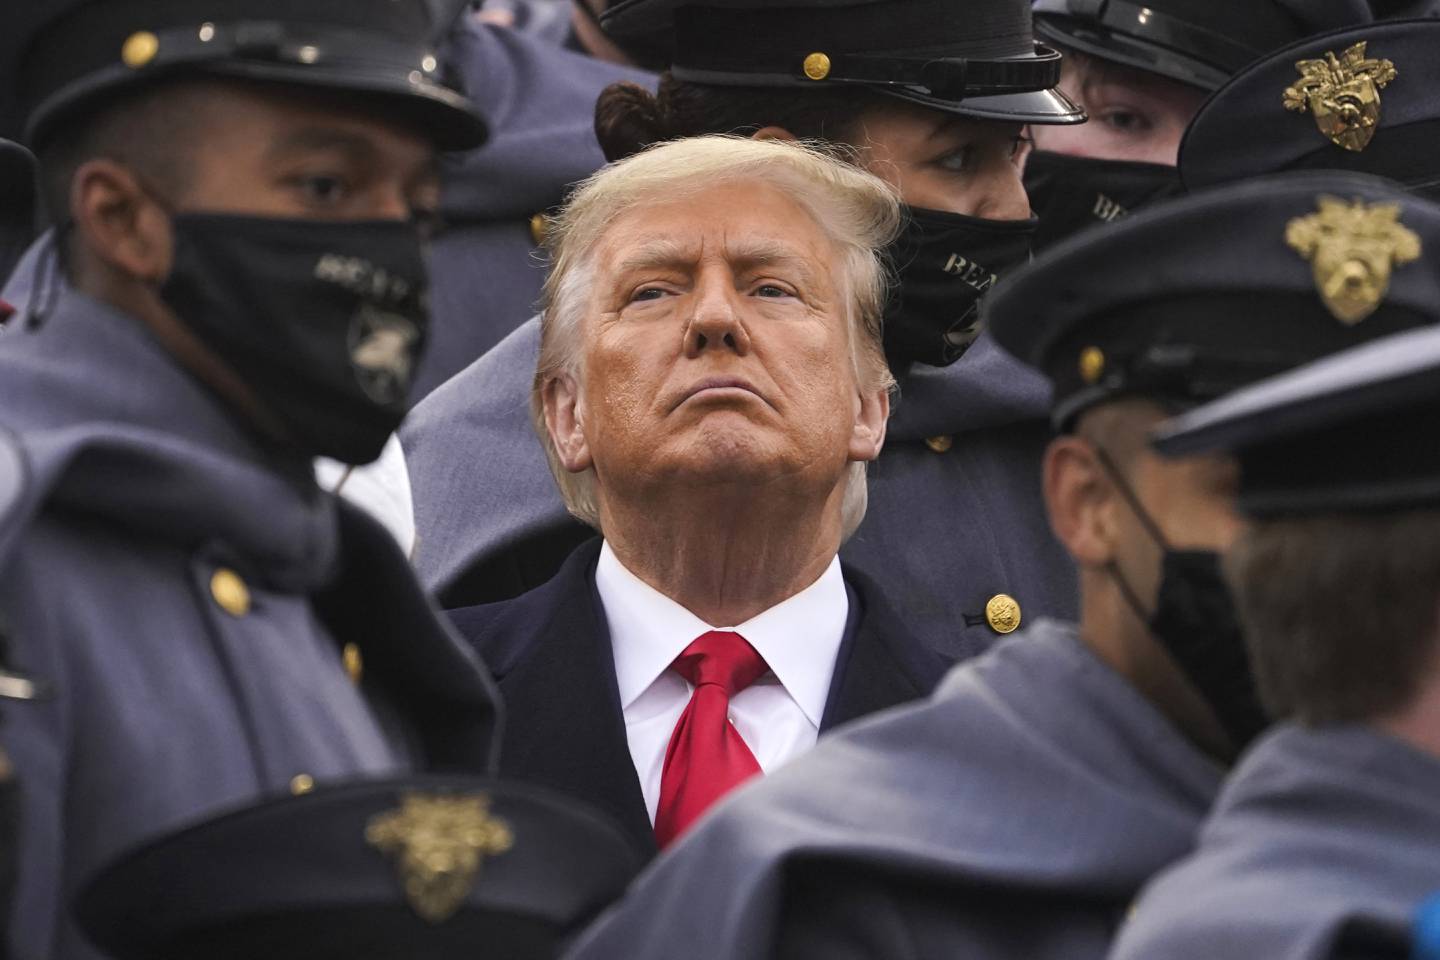 FILE - Surrounded by Army cadets, President Donald Trump watches the first half of the 121st Army-Navy Football Game, Dec. 12, 2020, in West Point, N.Y. When New York's Adult Survivors Act expired on Friday, Nov. 24, 2023, more than 3,700 legal claims had been filed, with many of the last few coming against big-name celebrities and a handful of politicians, such as Trump. (AP Photo/Andrew Harnik, File)